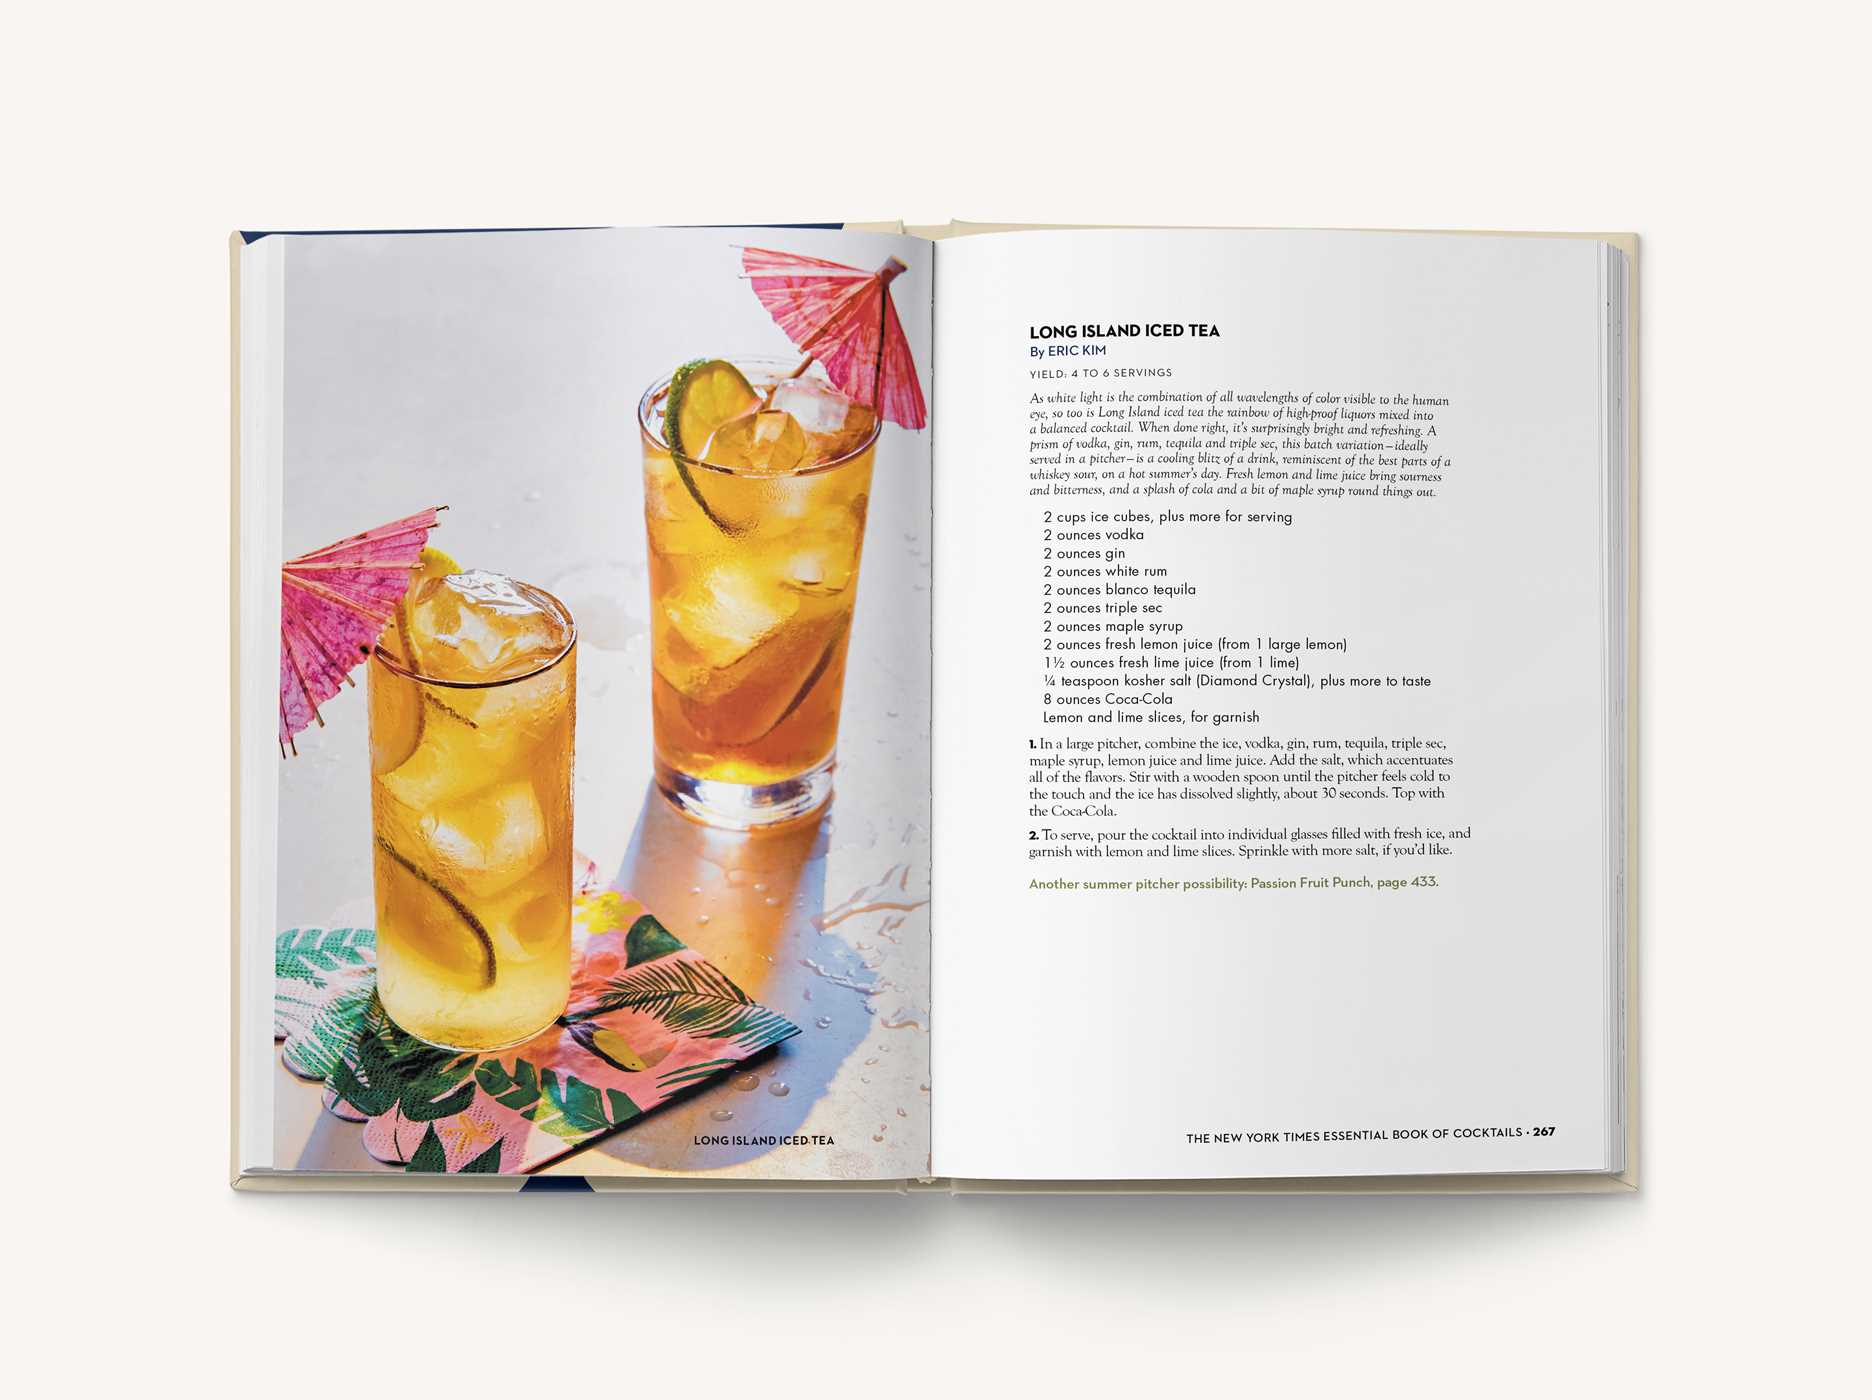 The New York Times Essential Book of Cocktails (Second Edition): Over 400 Classic Drink Recipes With Great Writing from The New York Times [Book]